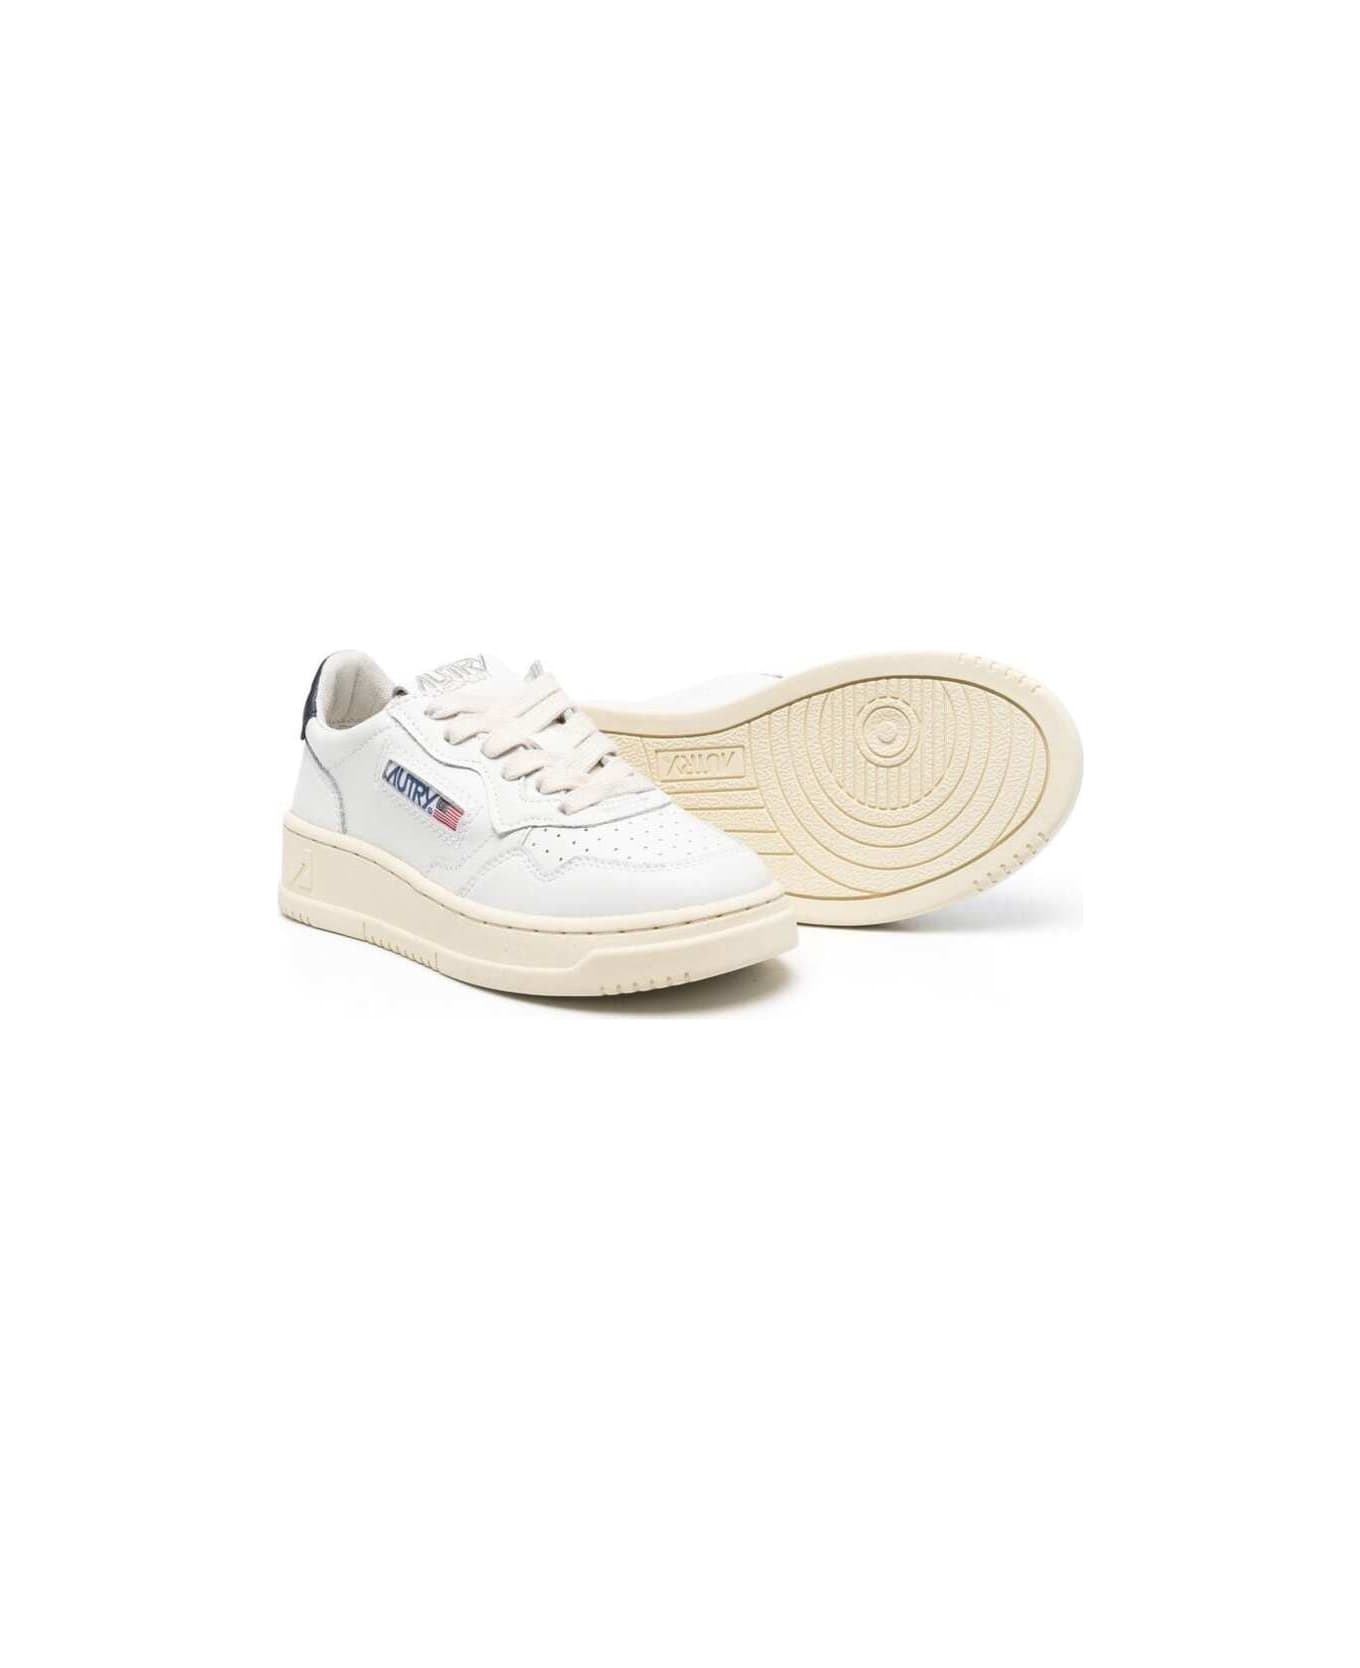 Autry White 'medalist' Low Top Sneakers In Cow Leather - White